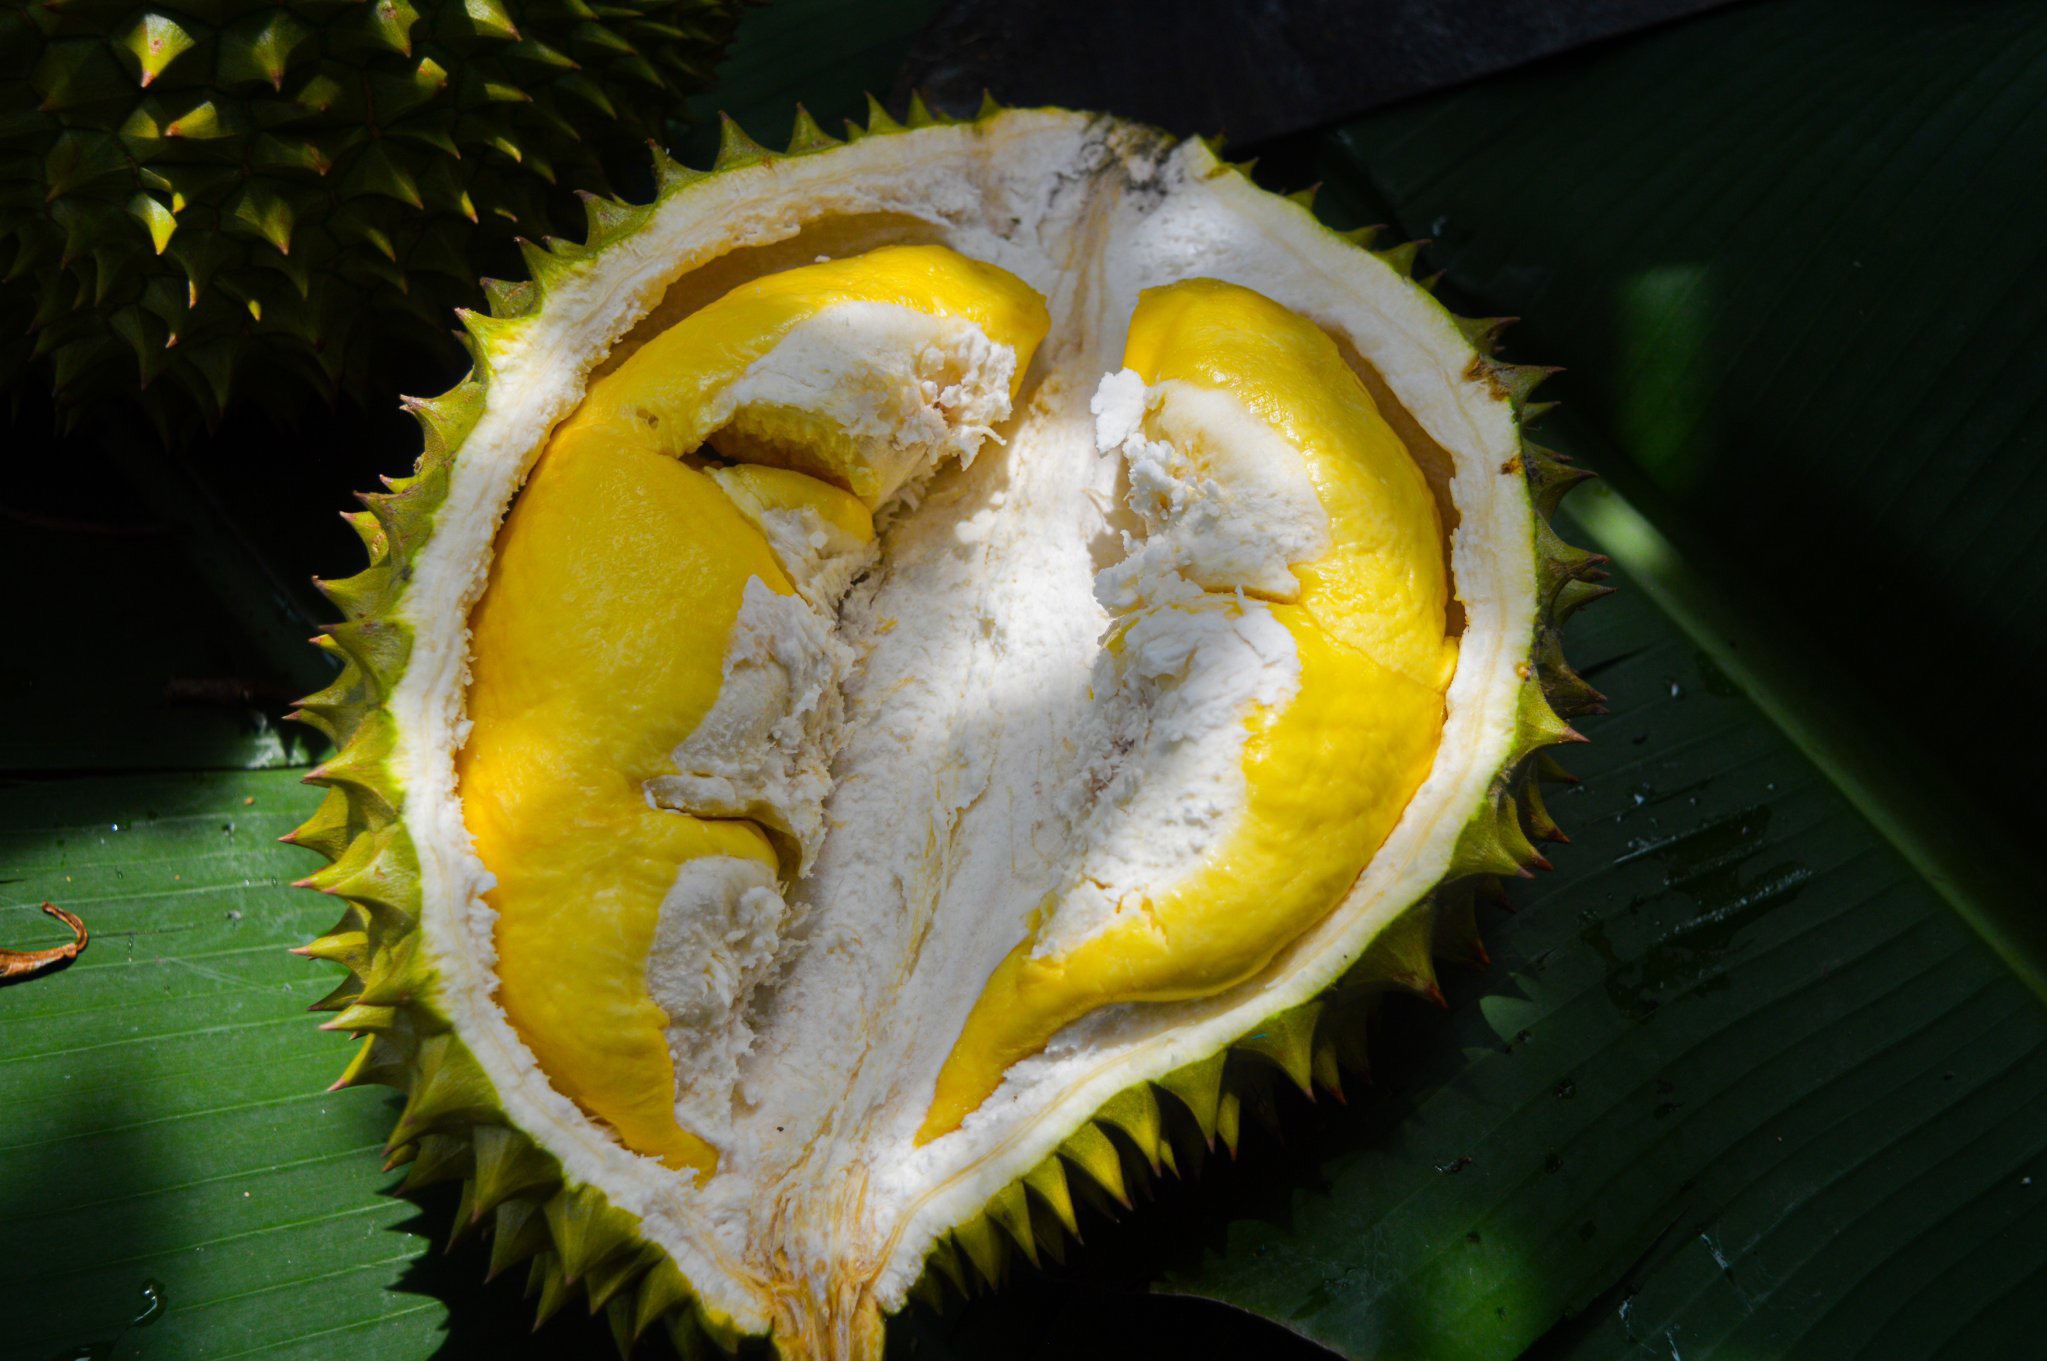 Durian – the “King of Fruits”: Smelly but Incredibly Nutritious